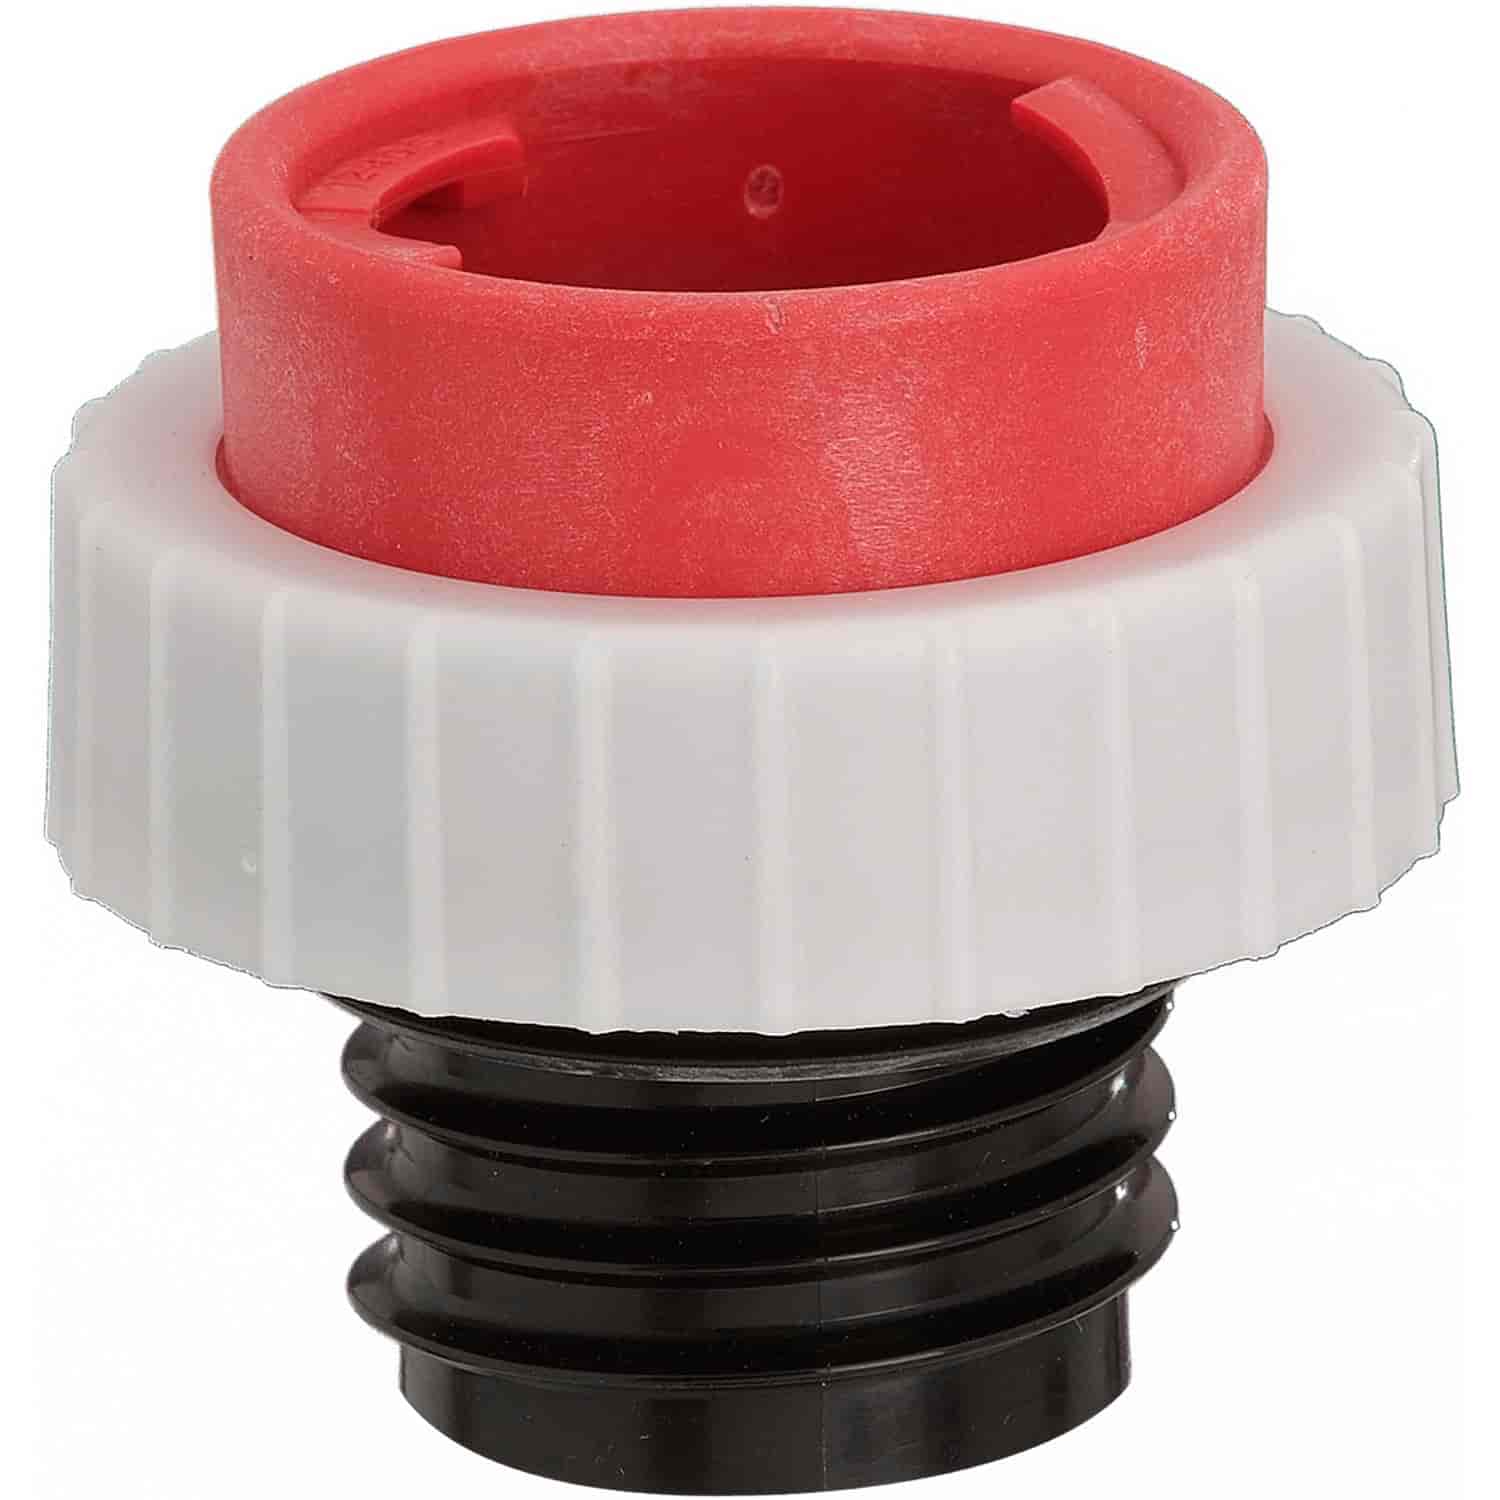 Fuel Cap Testers and Adapters